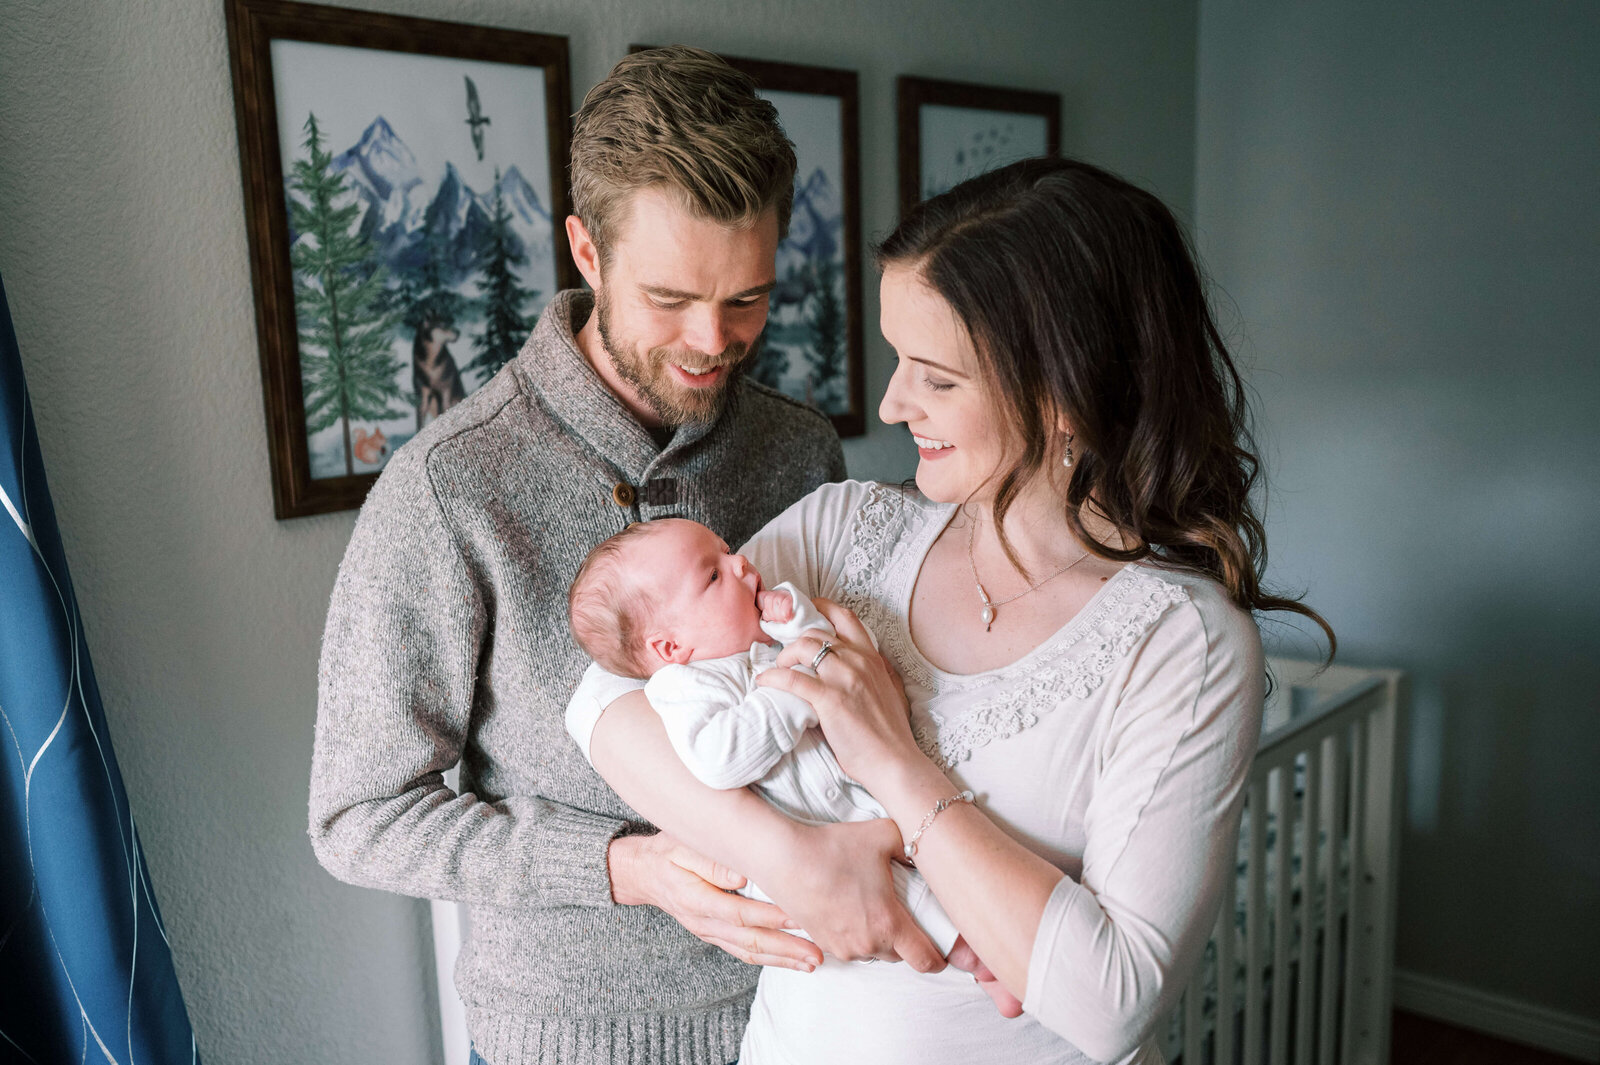 While standing in their woodland themed nursery, a new family admires their baby son